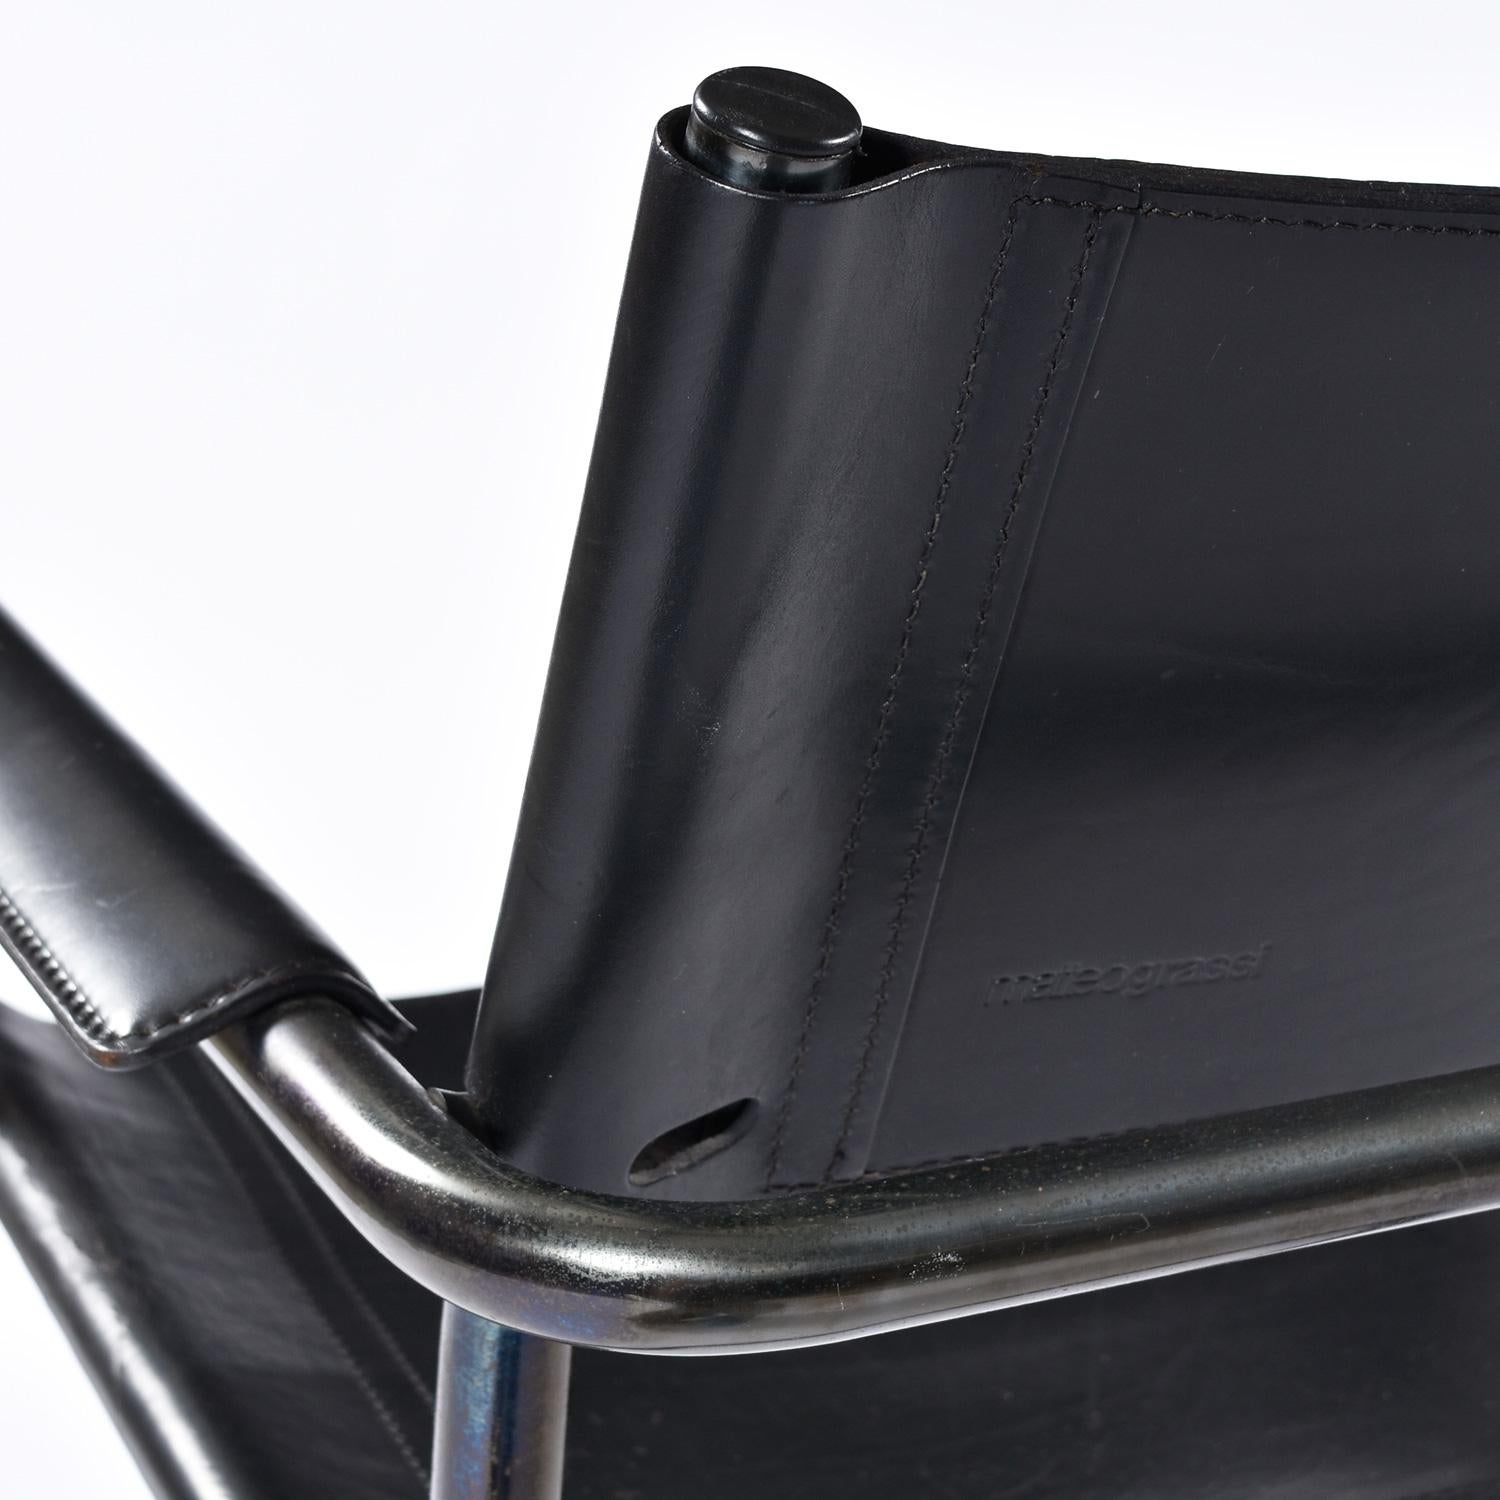 Matteo Grassi Cantilever MG5 Black Leather Chairs by Centro Studi In Good Condition For Sale In Chattanooga, TN